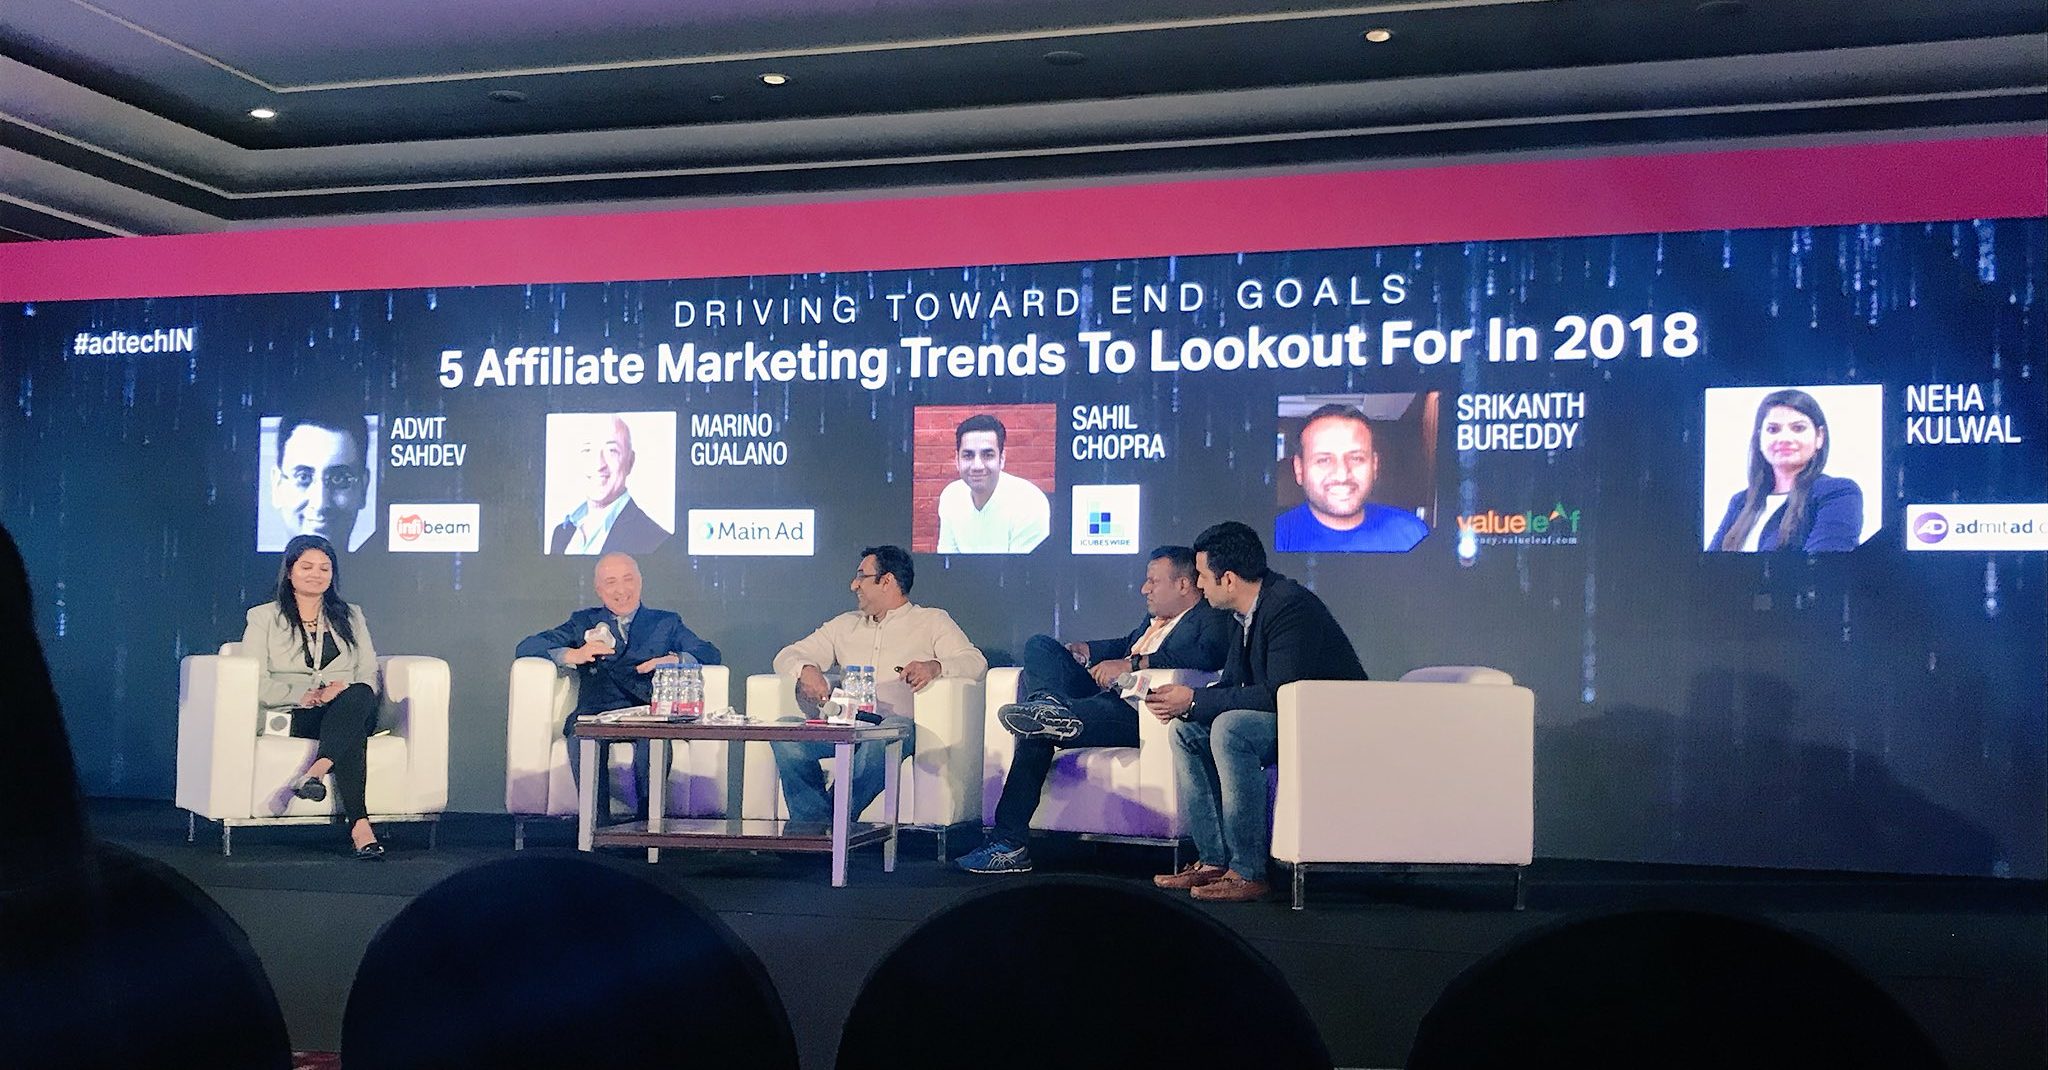 Marino Gualano, GM, on a panel discussion about '5 Affiliate Marketing Trends' at ad:tech New Delhi